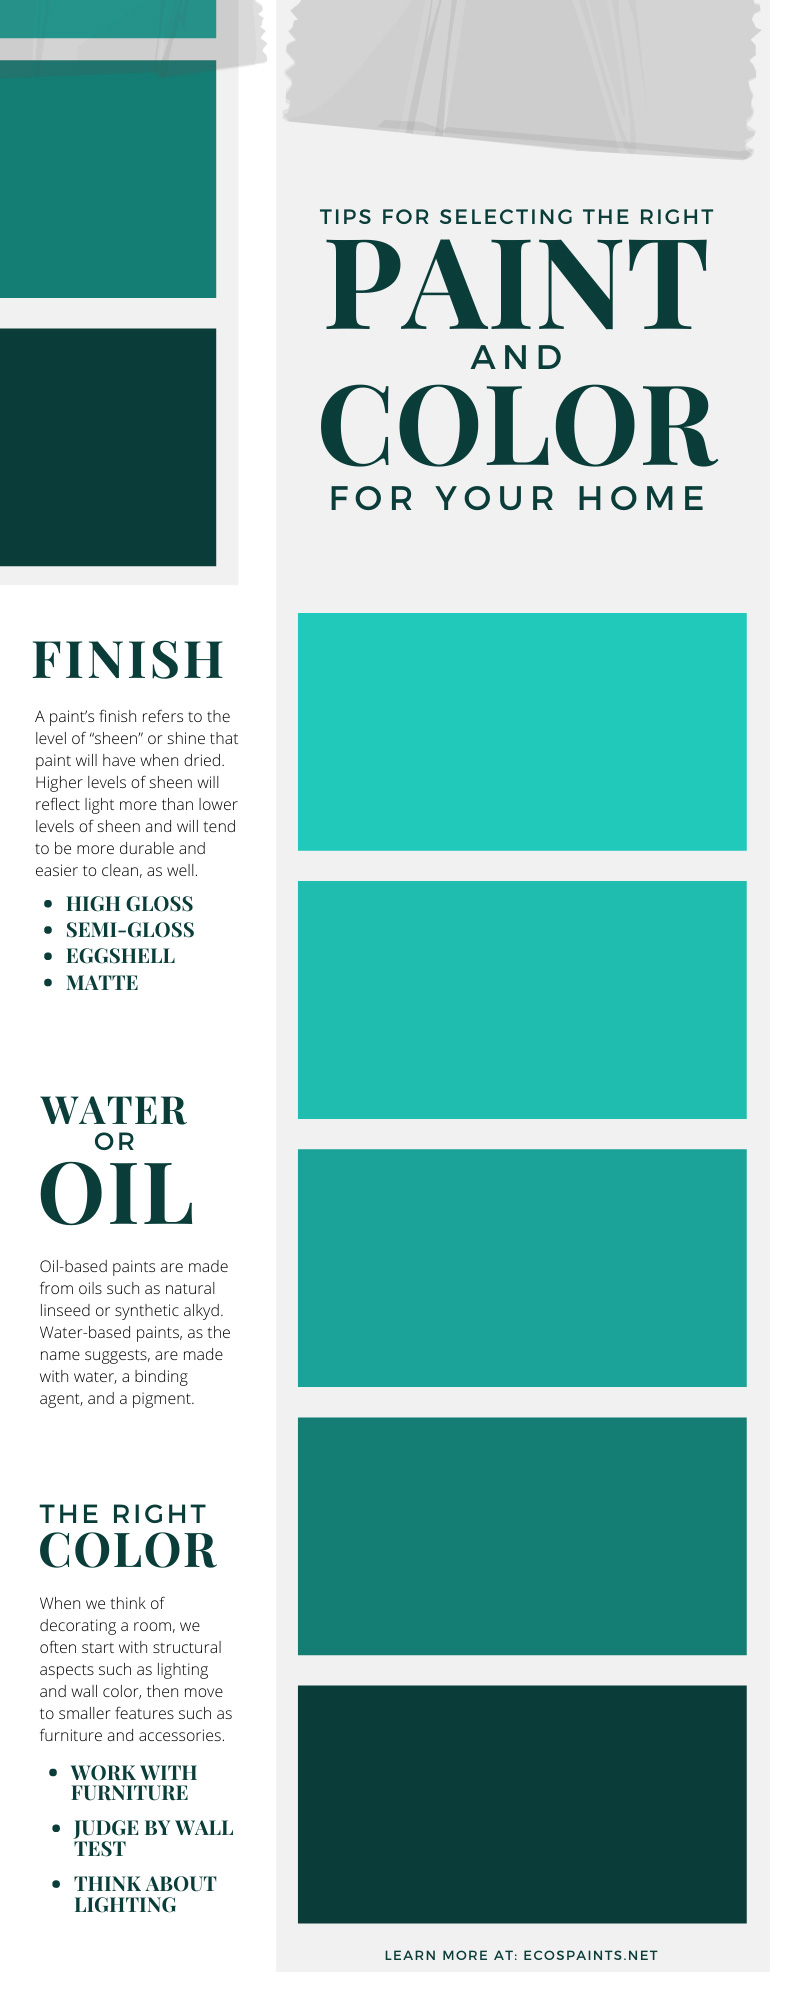 Tips for Selecting the Right Paint and Color for Your Home